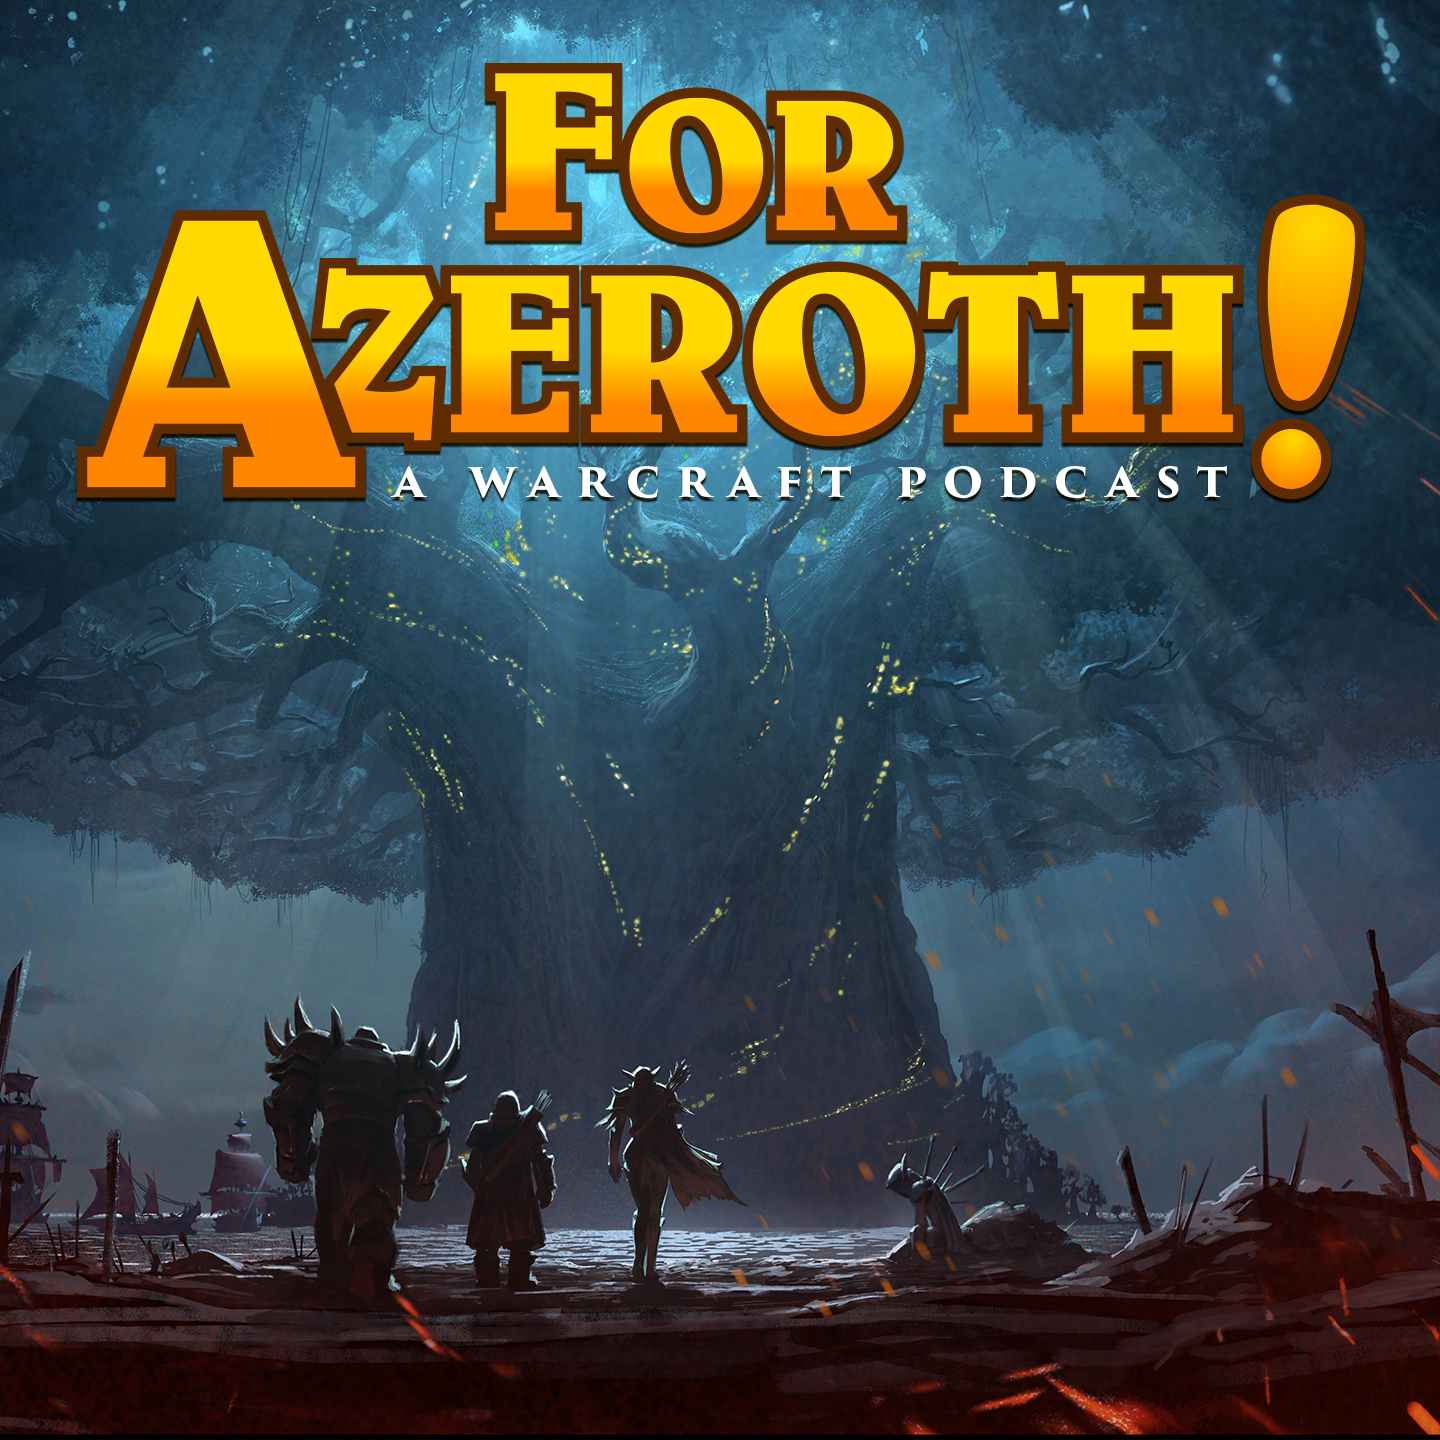 #119 - For Azeroth!: “Goblins Are Too Schooshie”